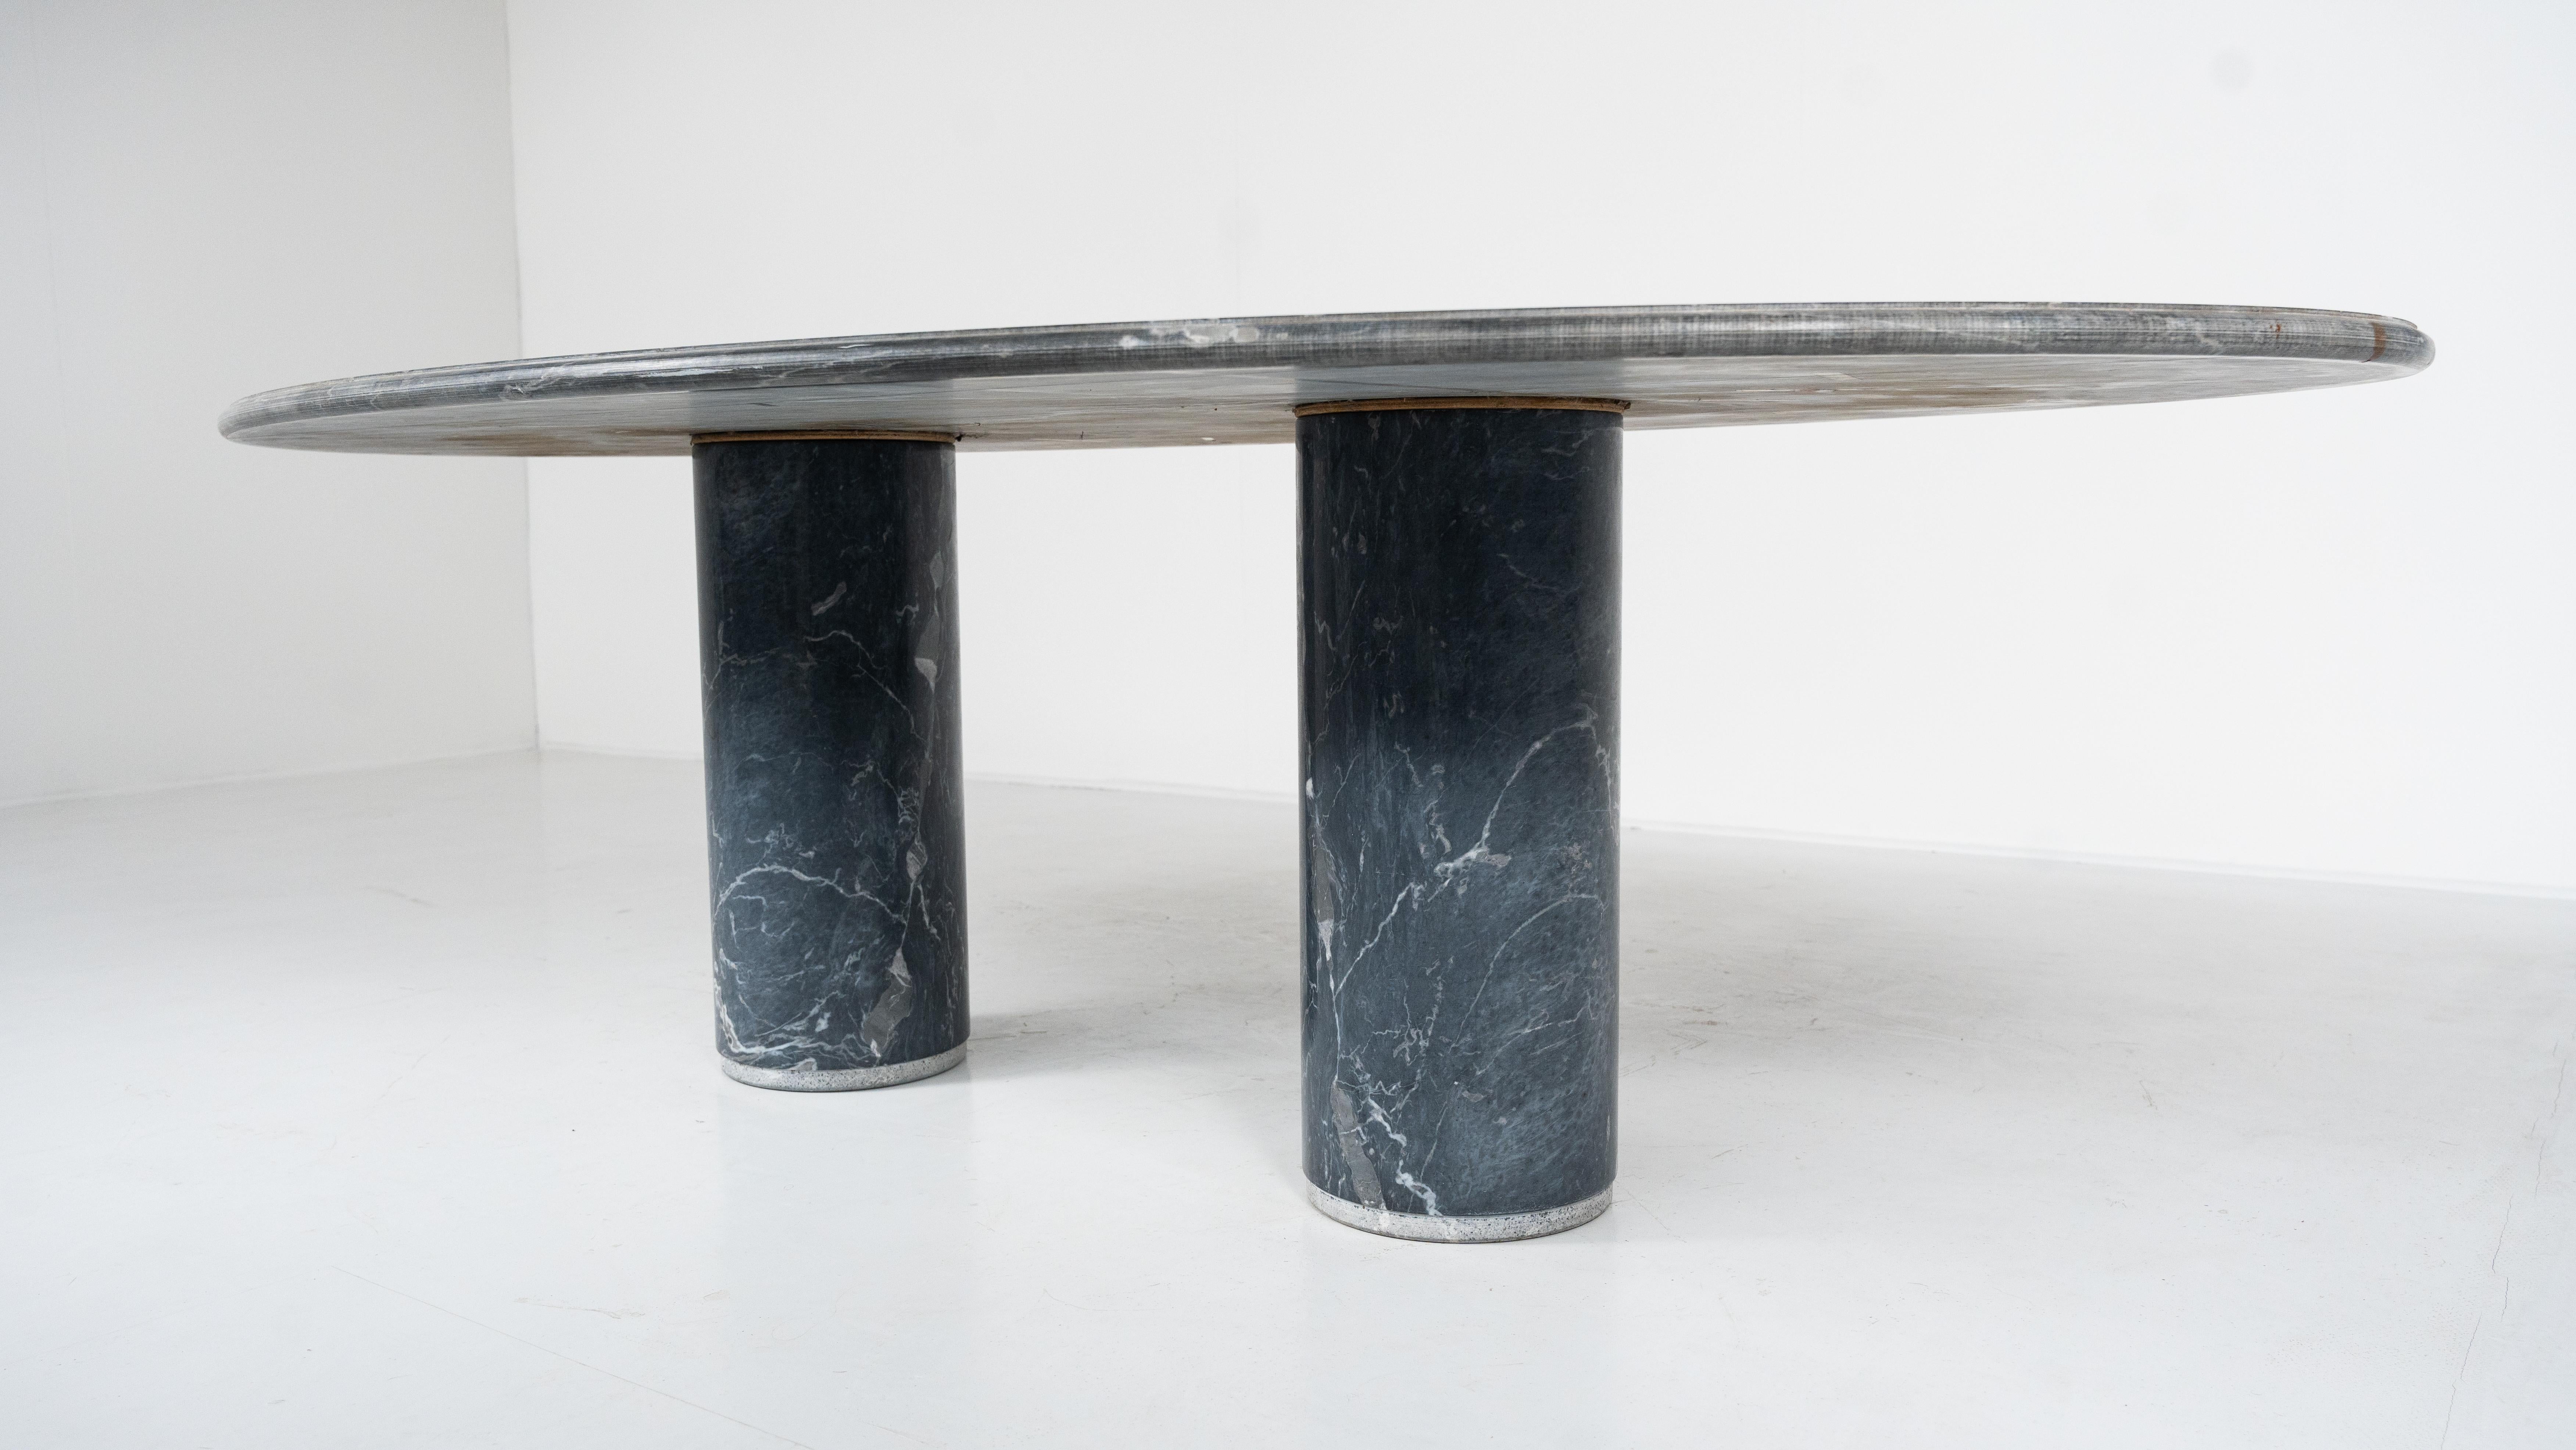 Ovale del Giardiniere Table by Achille Castiglioni for Upgroup, Marble, 1980s For Sale 3